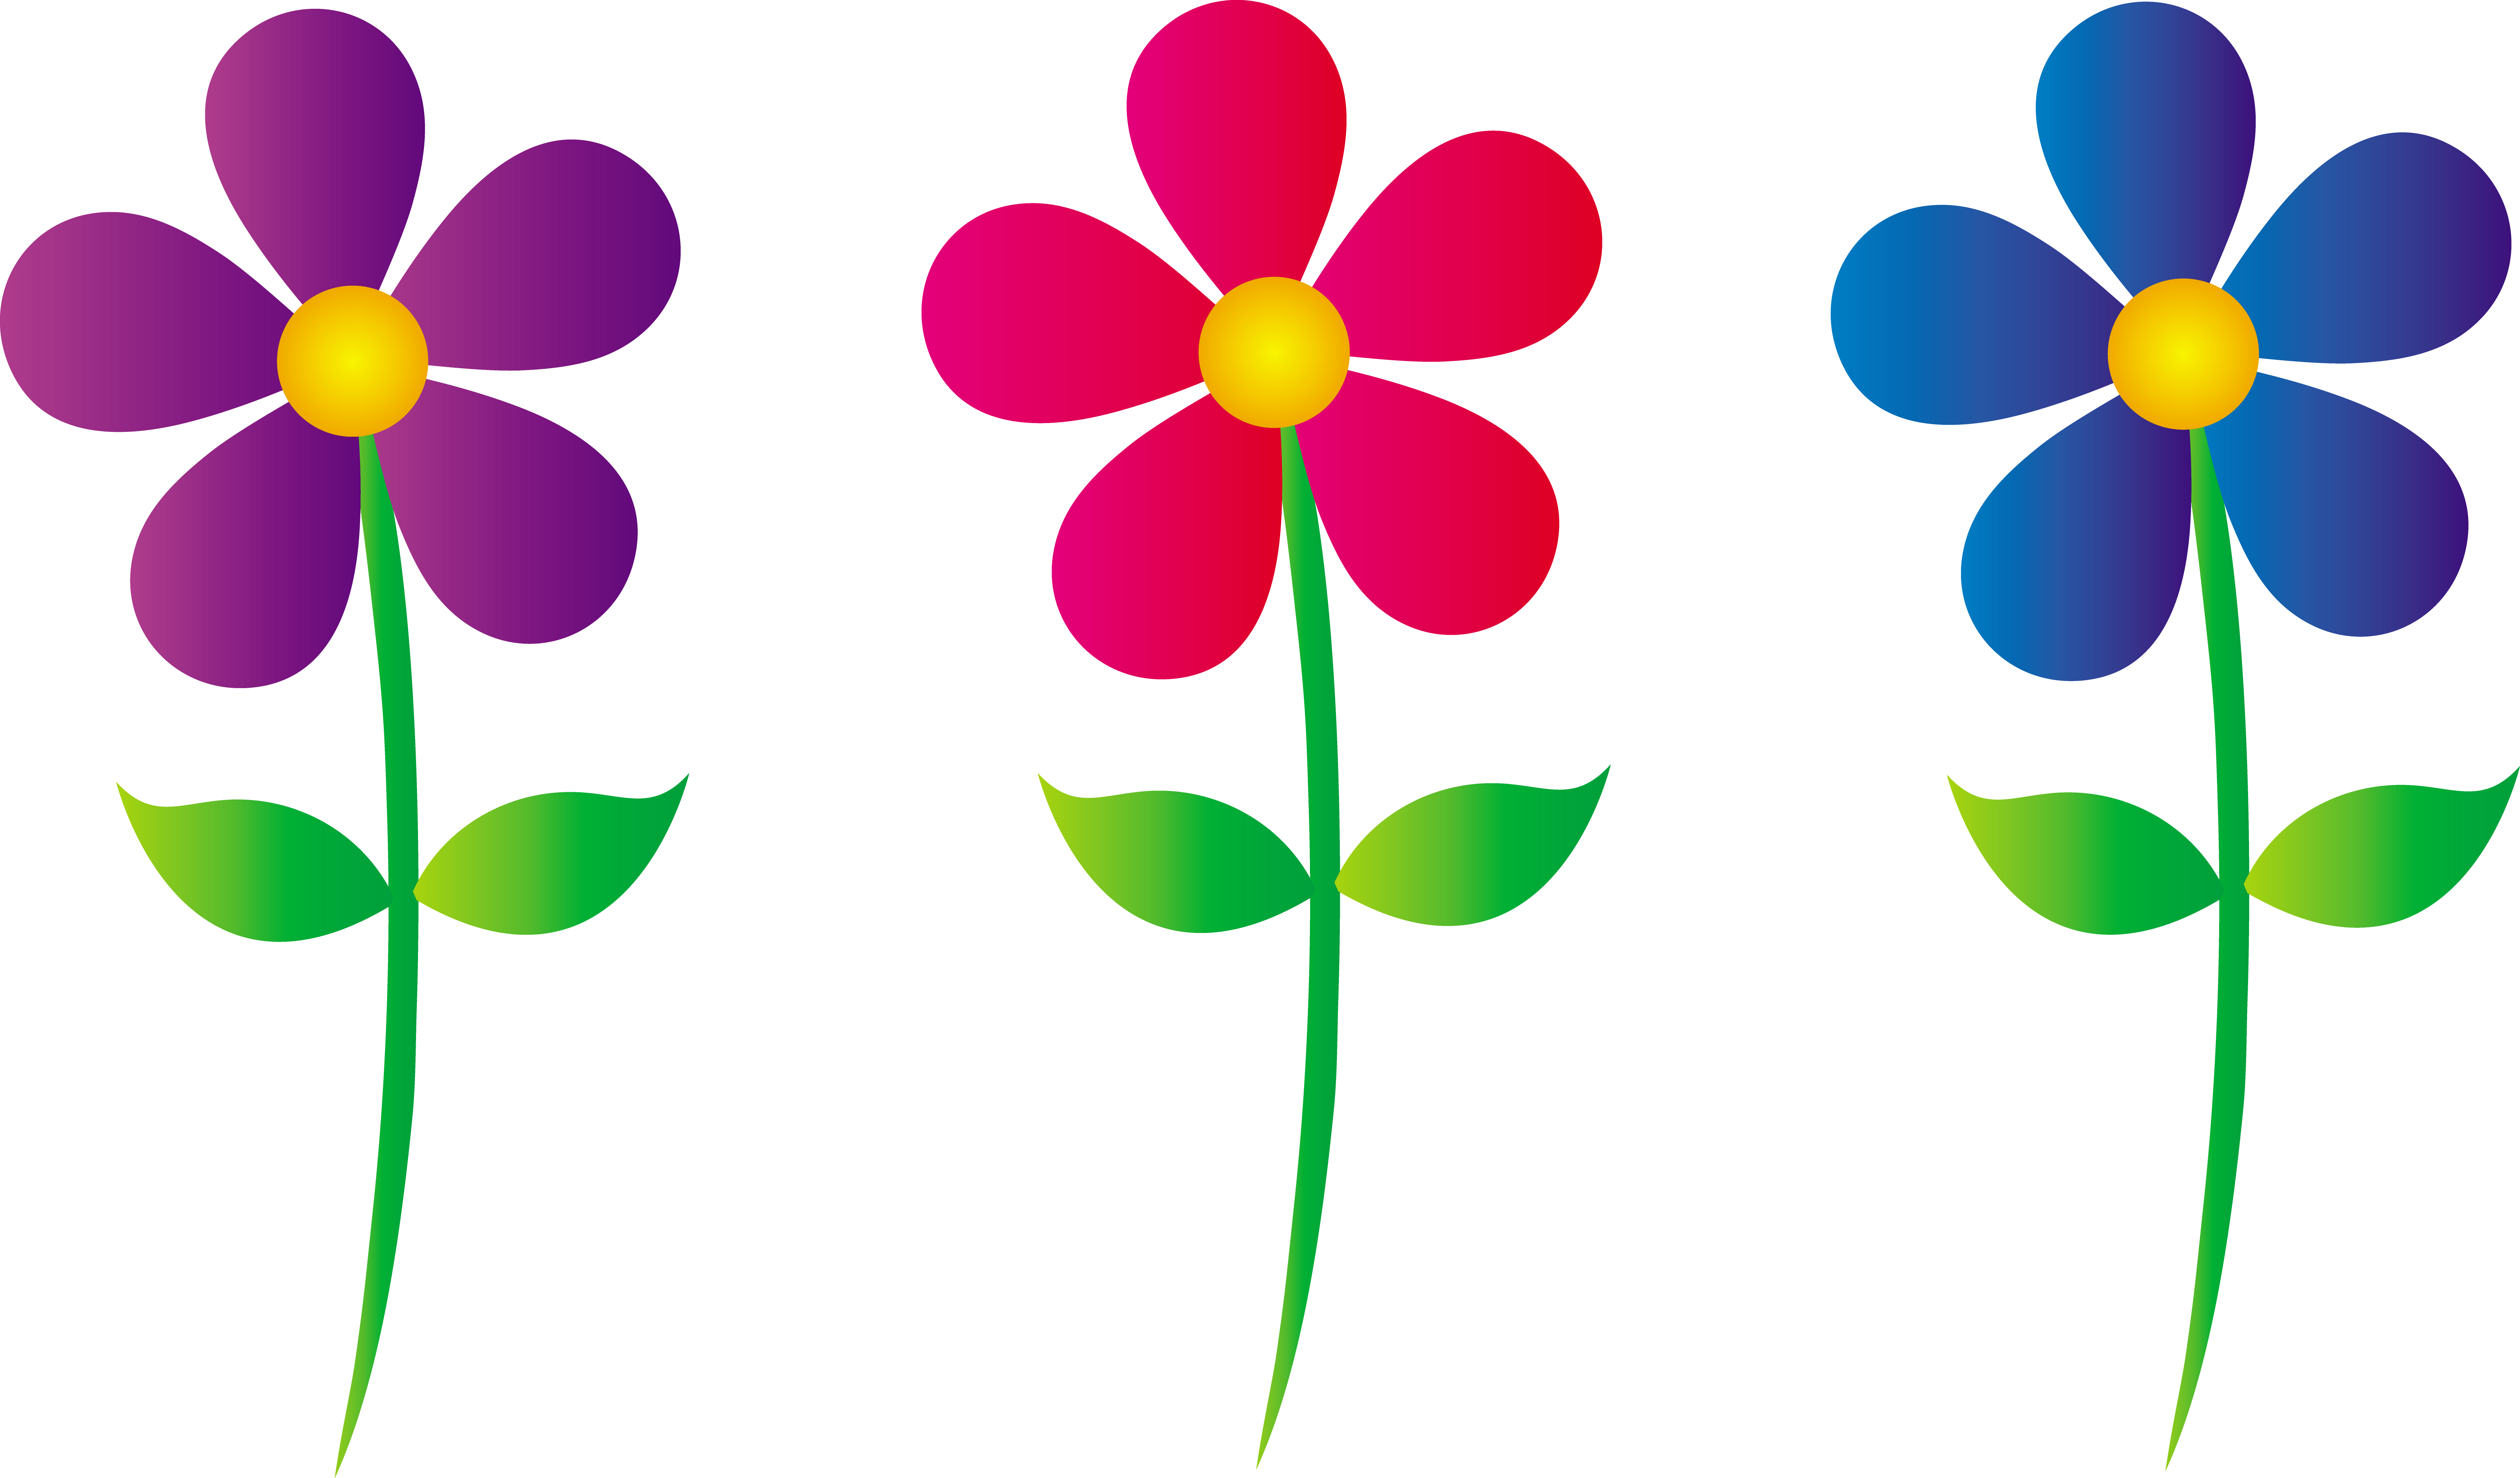 Flowers flower clipart free clipart image